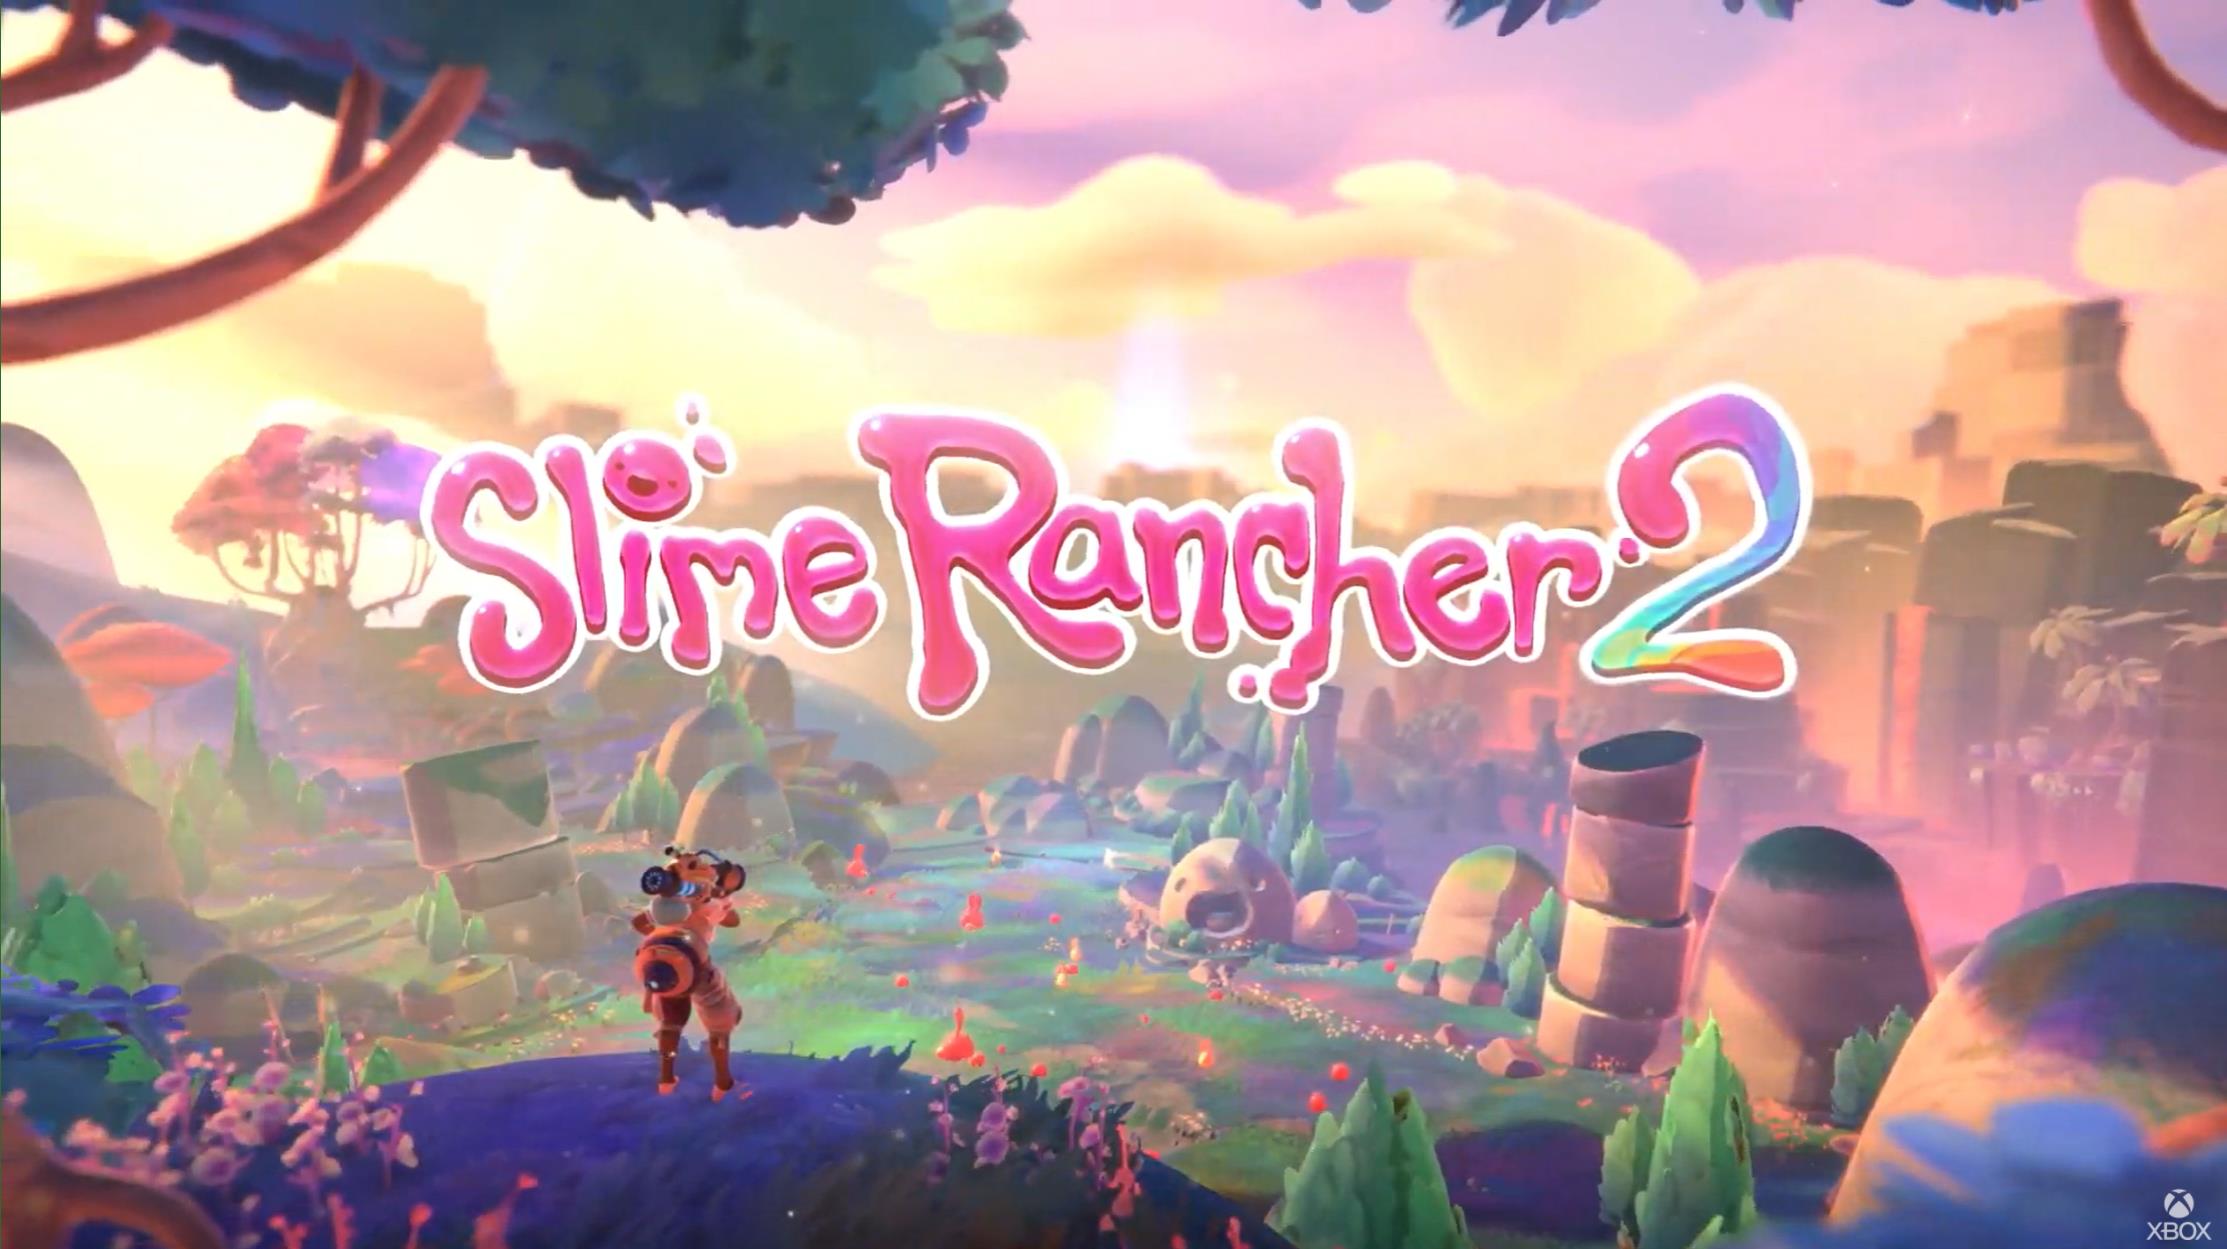 Slime Rancher 2 release date: 2022